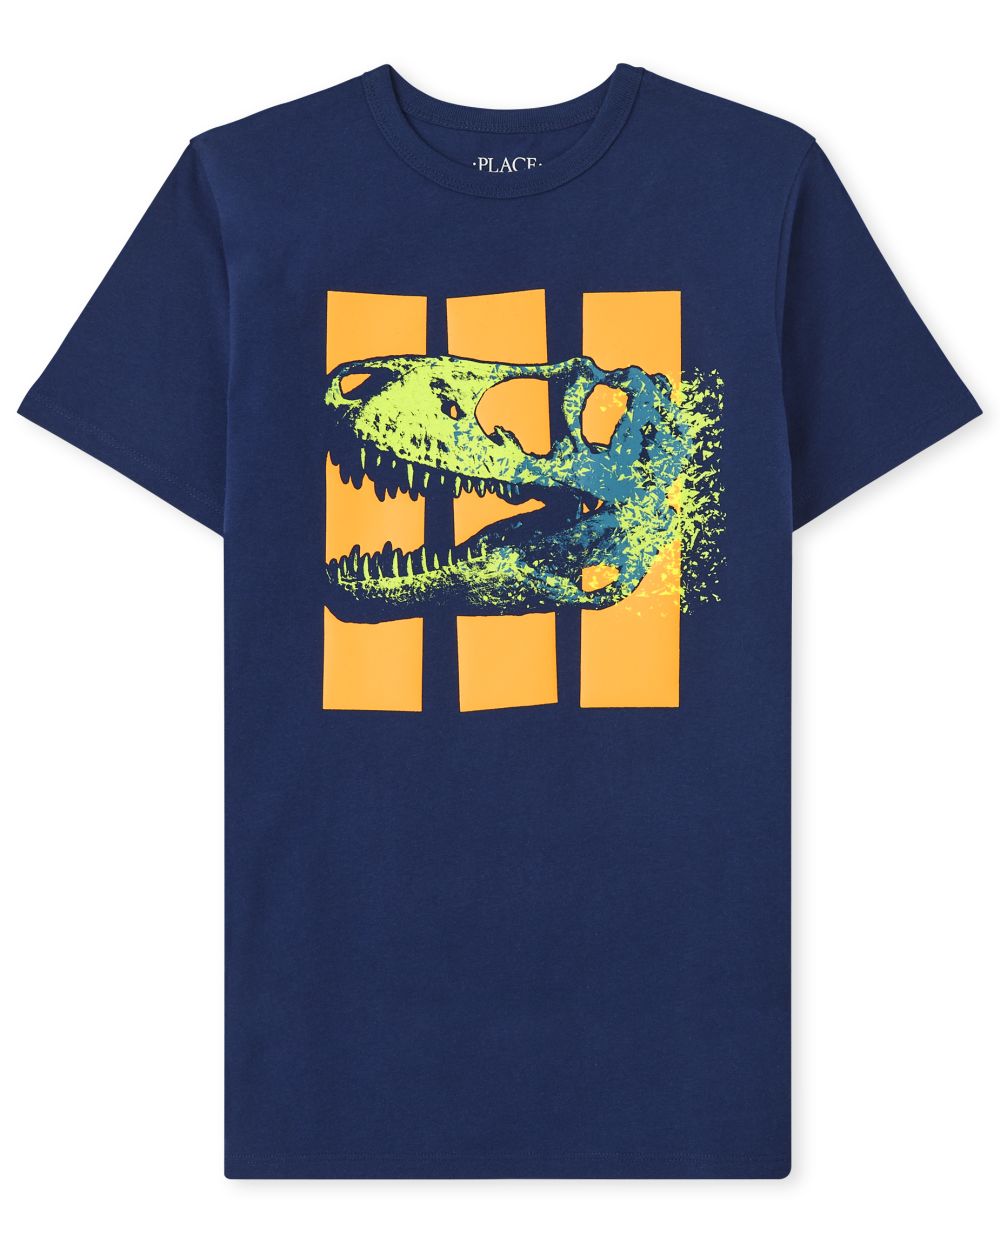 The Children's Place Boys Dino Graphic Tee - Blue - M (7/8)